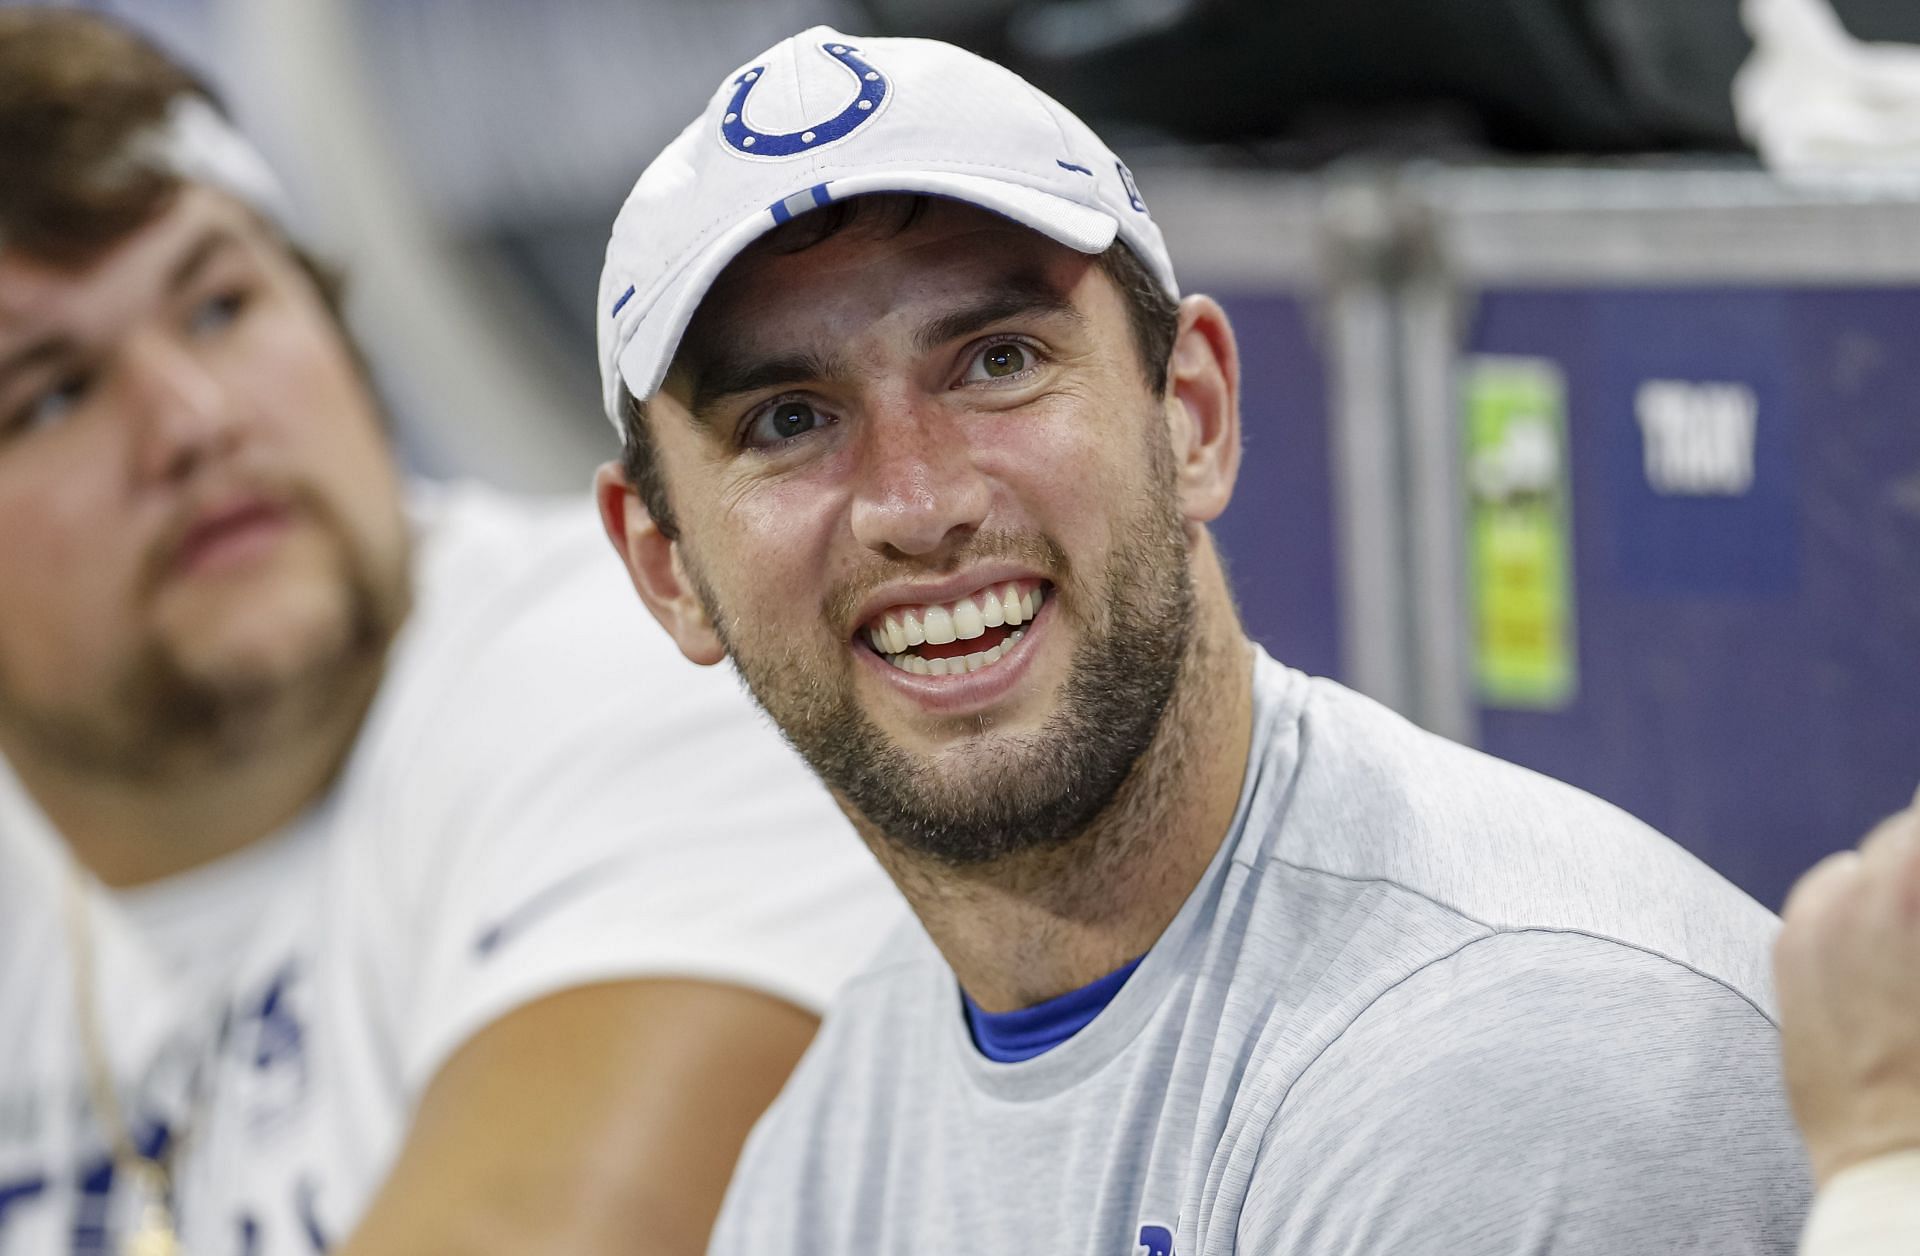 The Colts did not protect Andrew Luck.